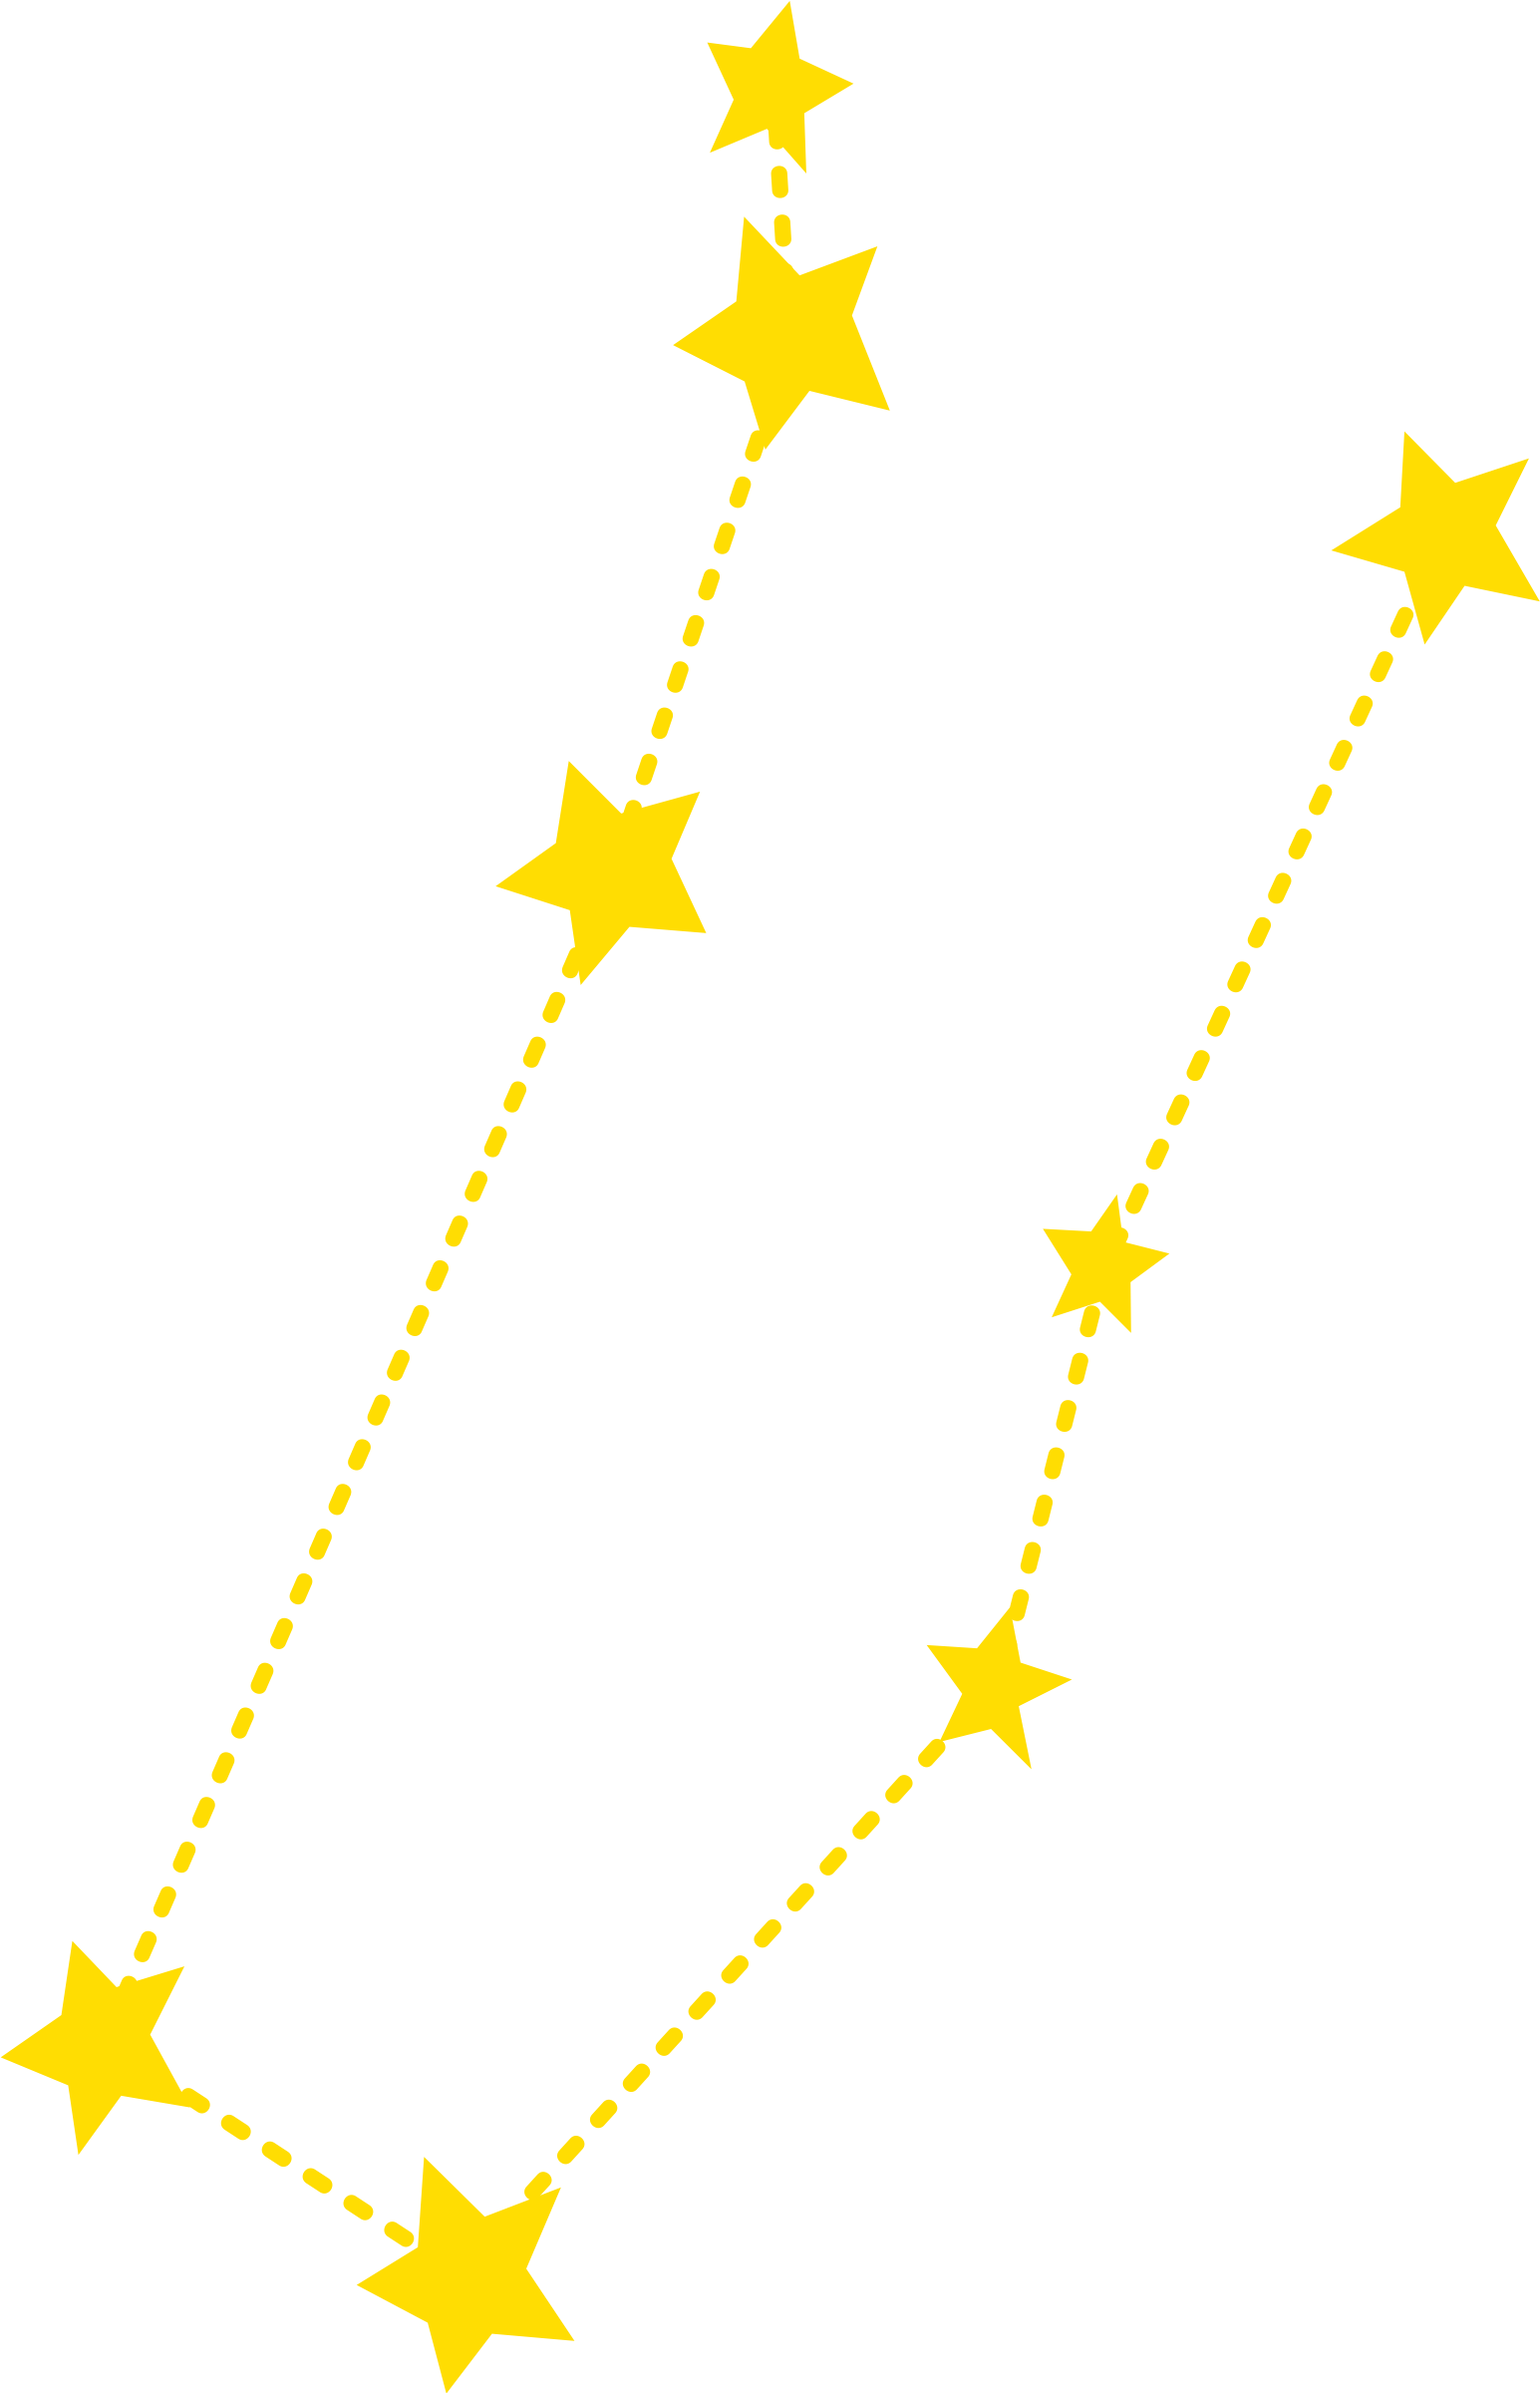 A Constellation Of Stars In The Sky